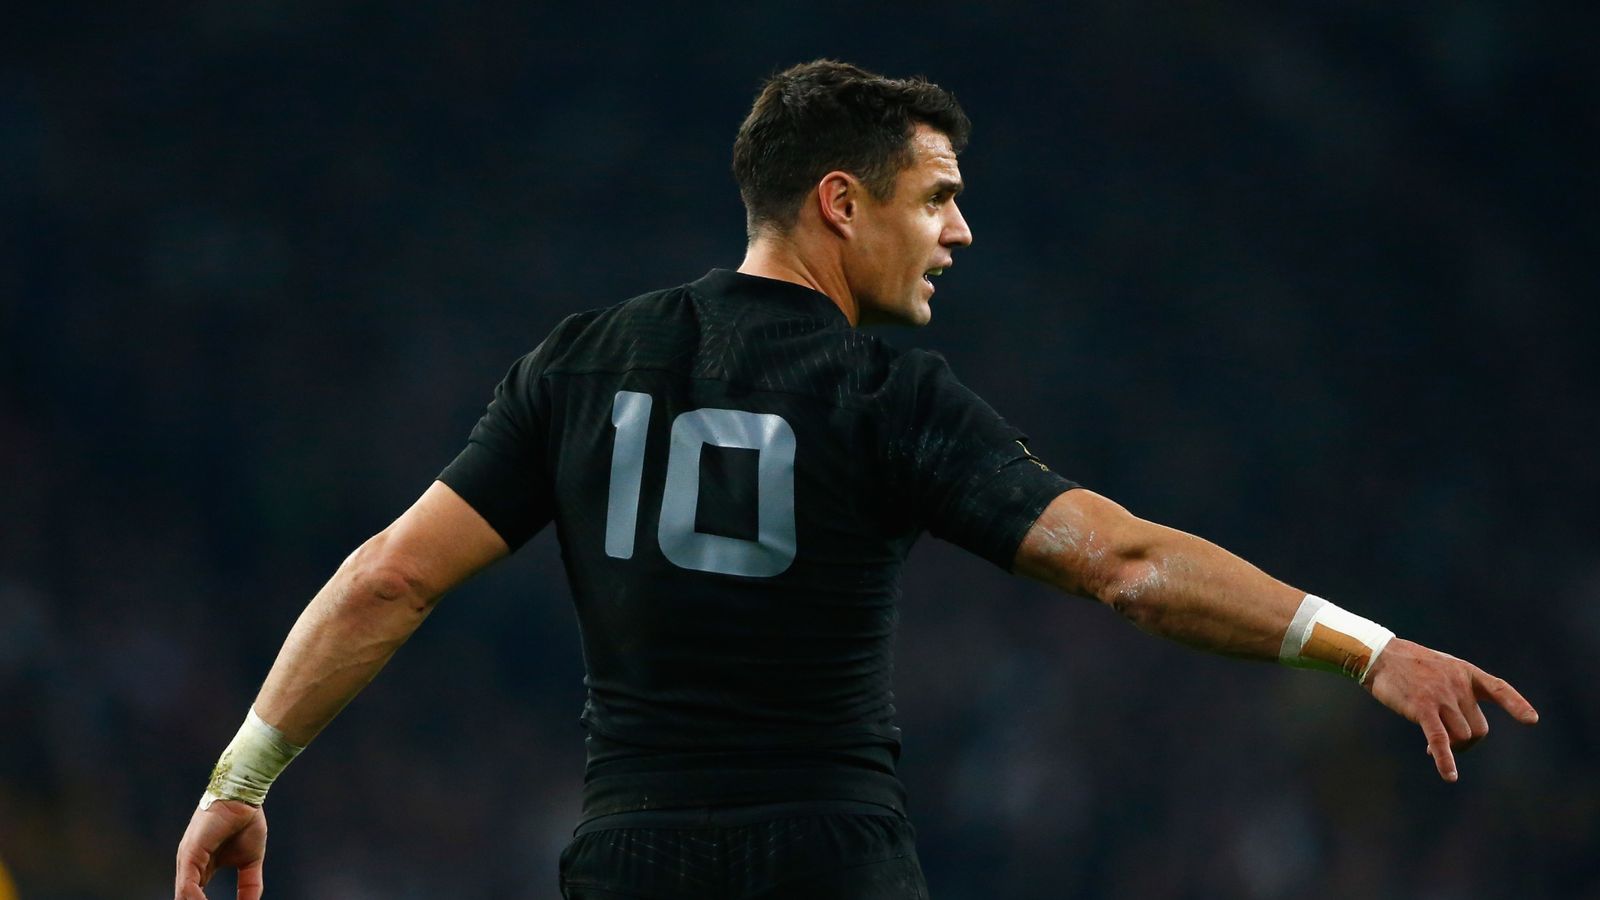 All Blacks fly-half Dan Carter fit and raring to go ahead of